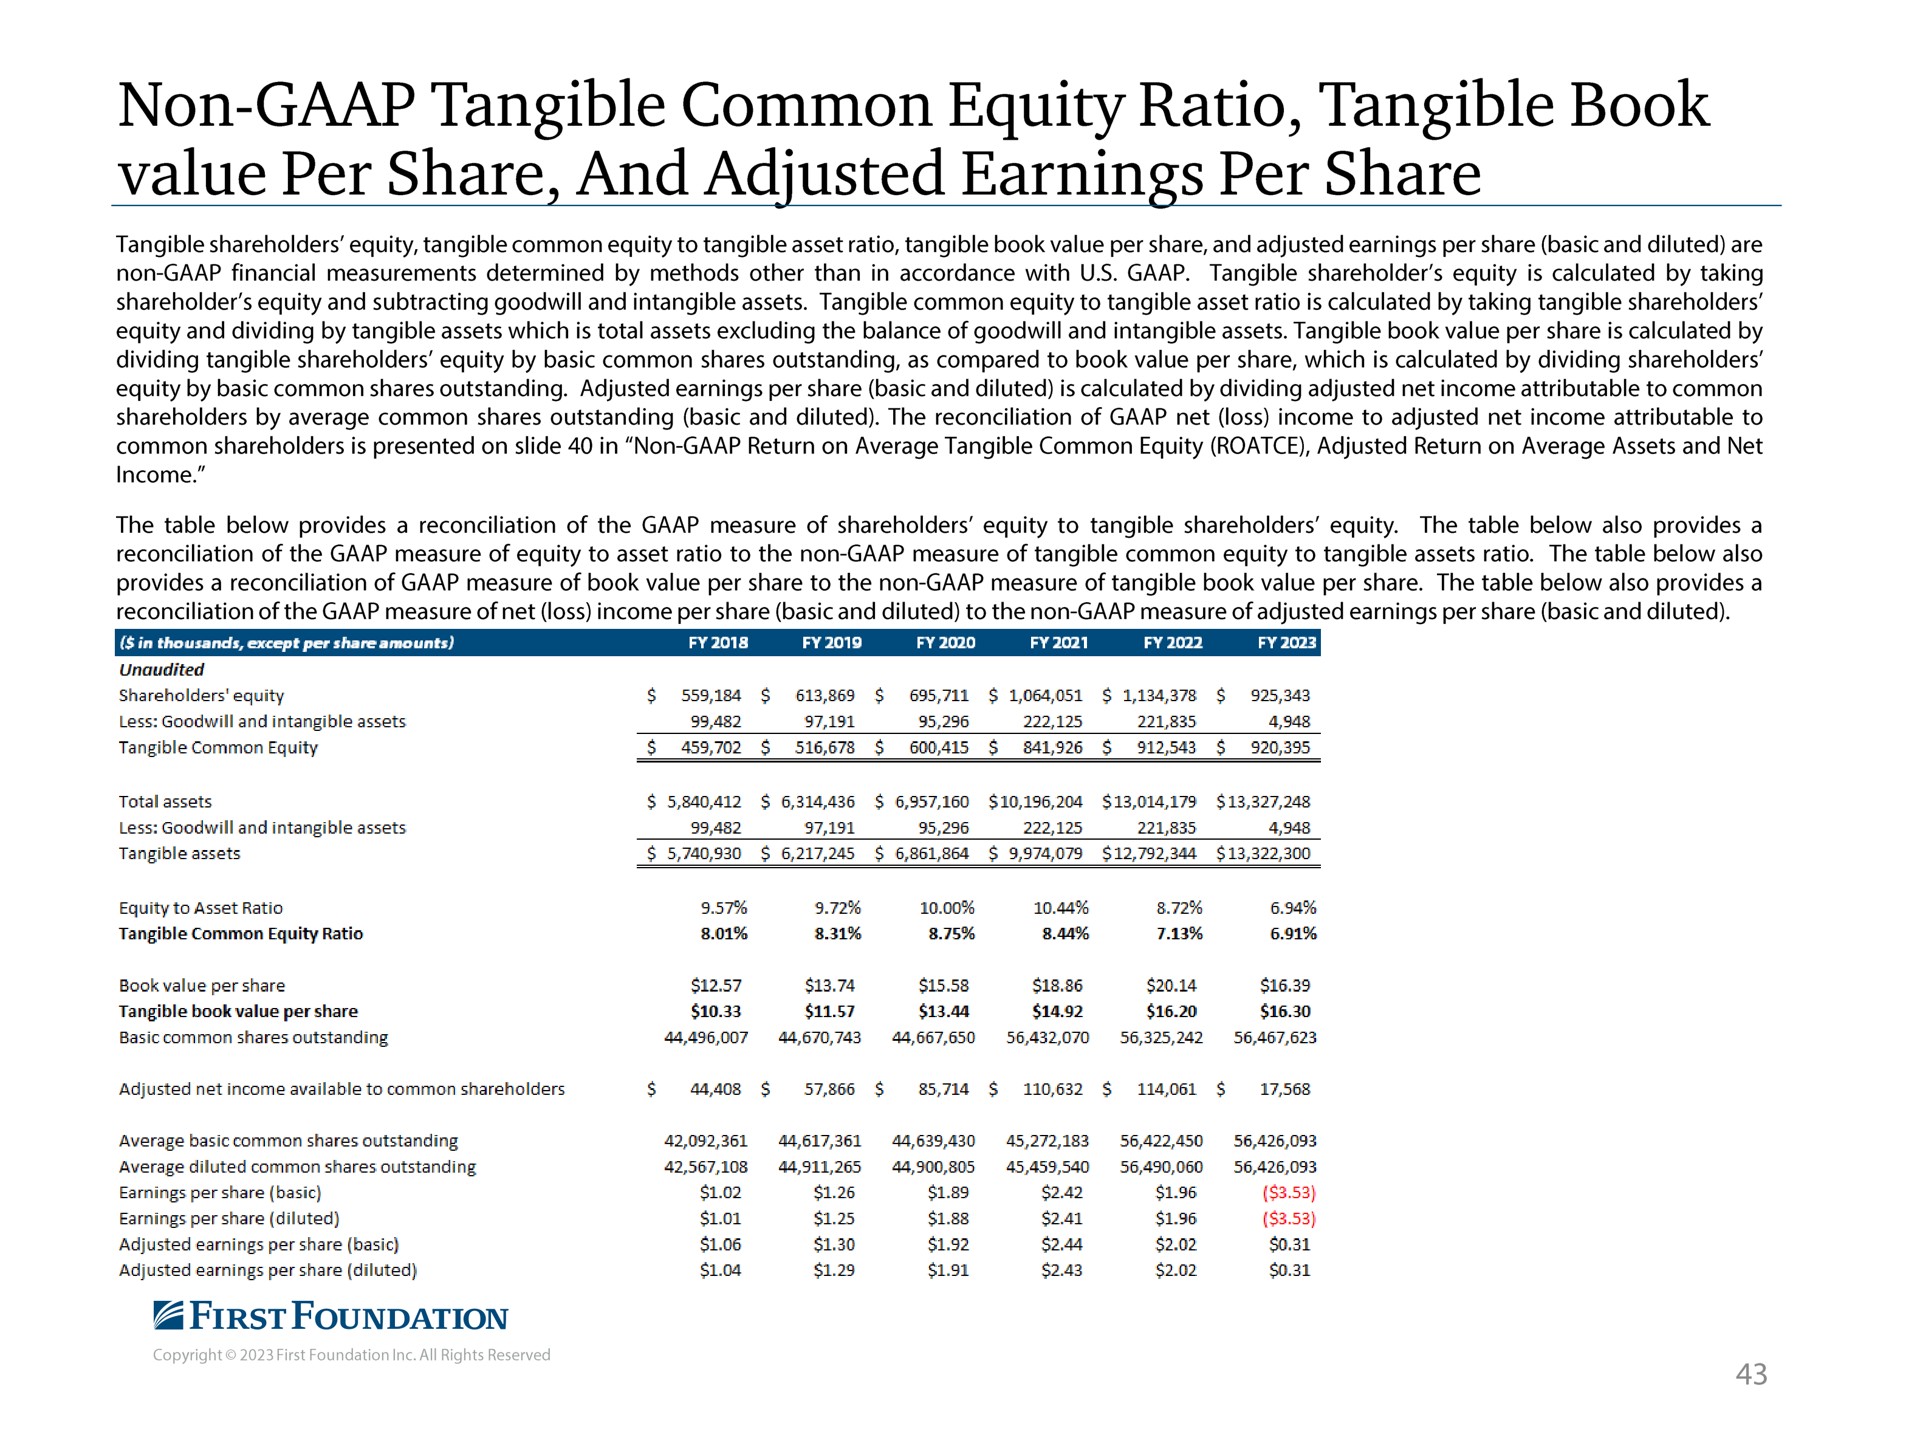 non tangible common equity ratio tangible book value per share and adjusted earnings per share | First Foundation